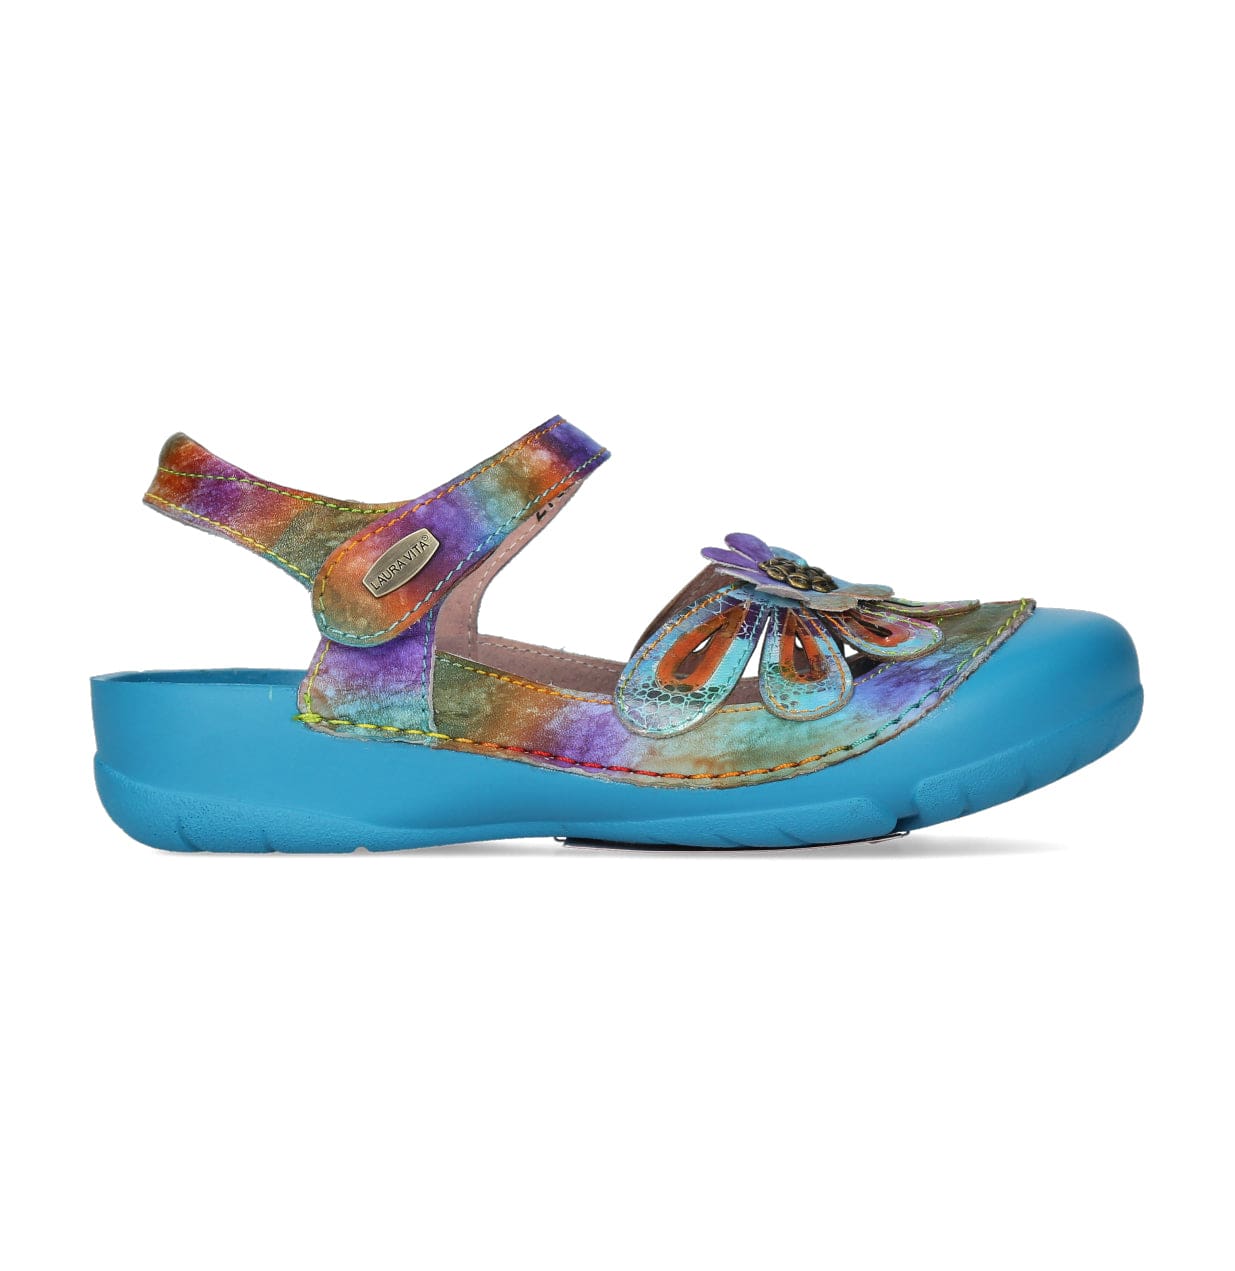 BECZIERSO shoes 12 - 35 / Turquoise - Mule